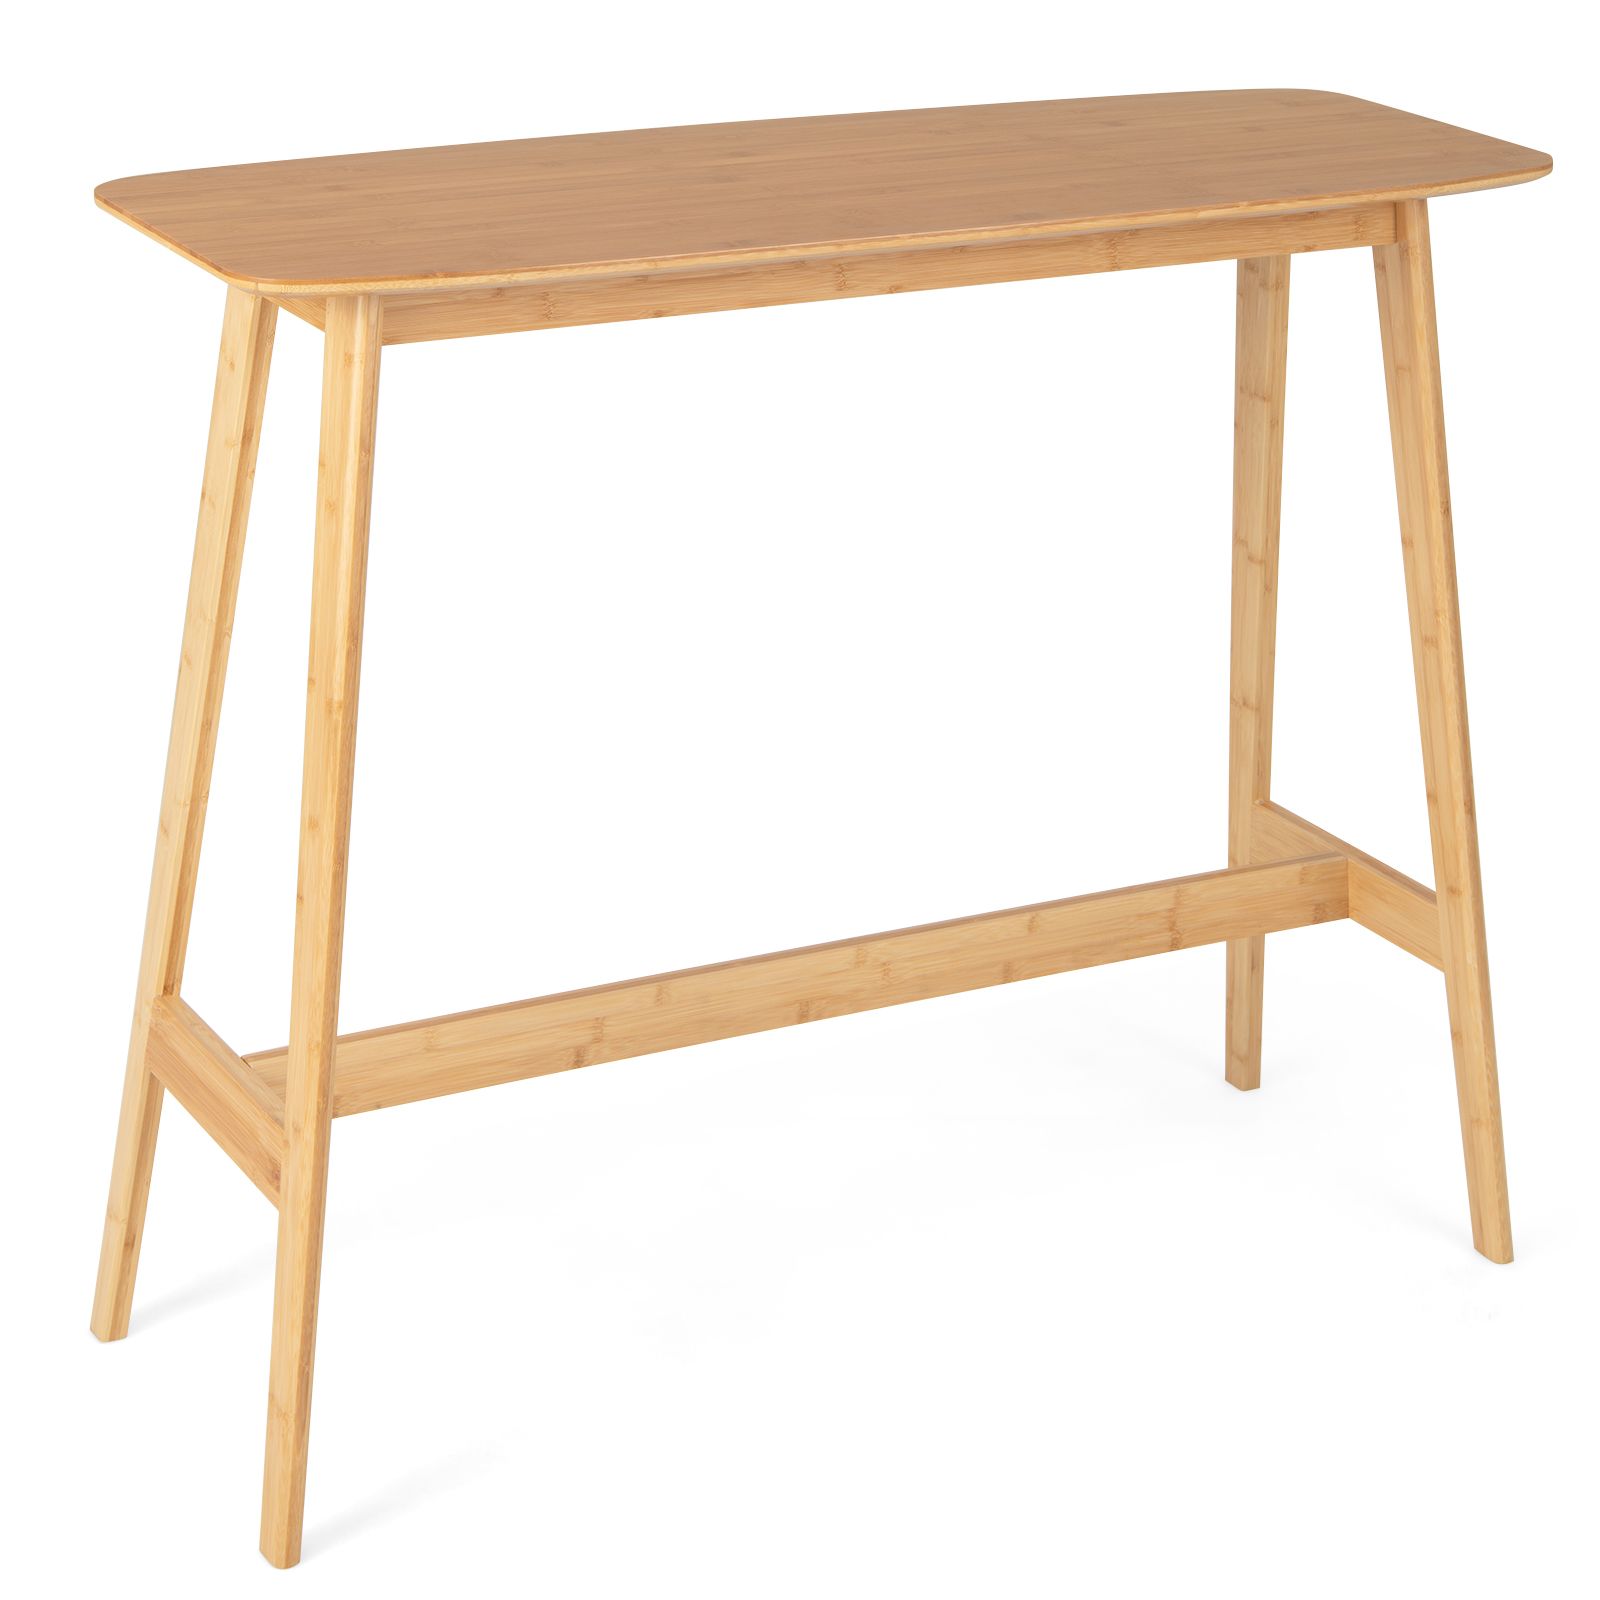 120x45x99cm Bamboo Bar Table with Footrest and Footpads for Home Kitchen